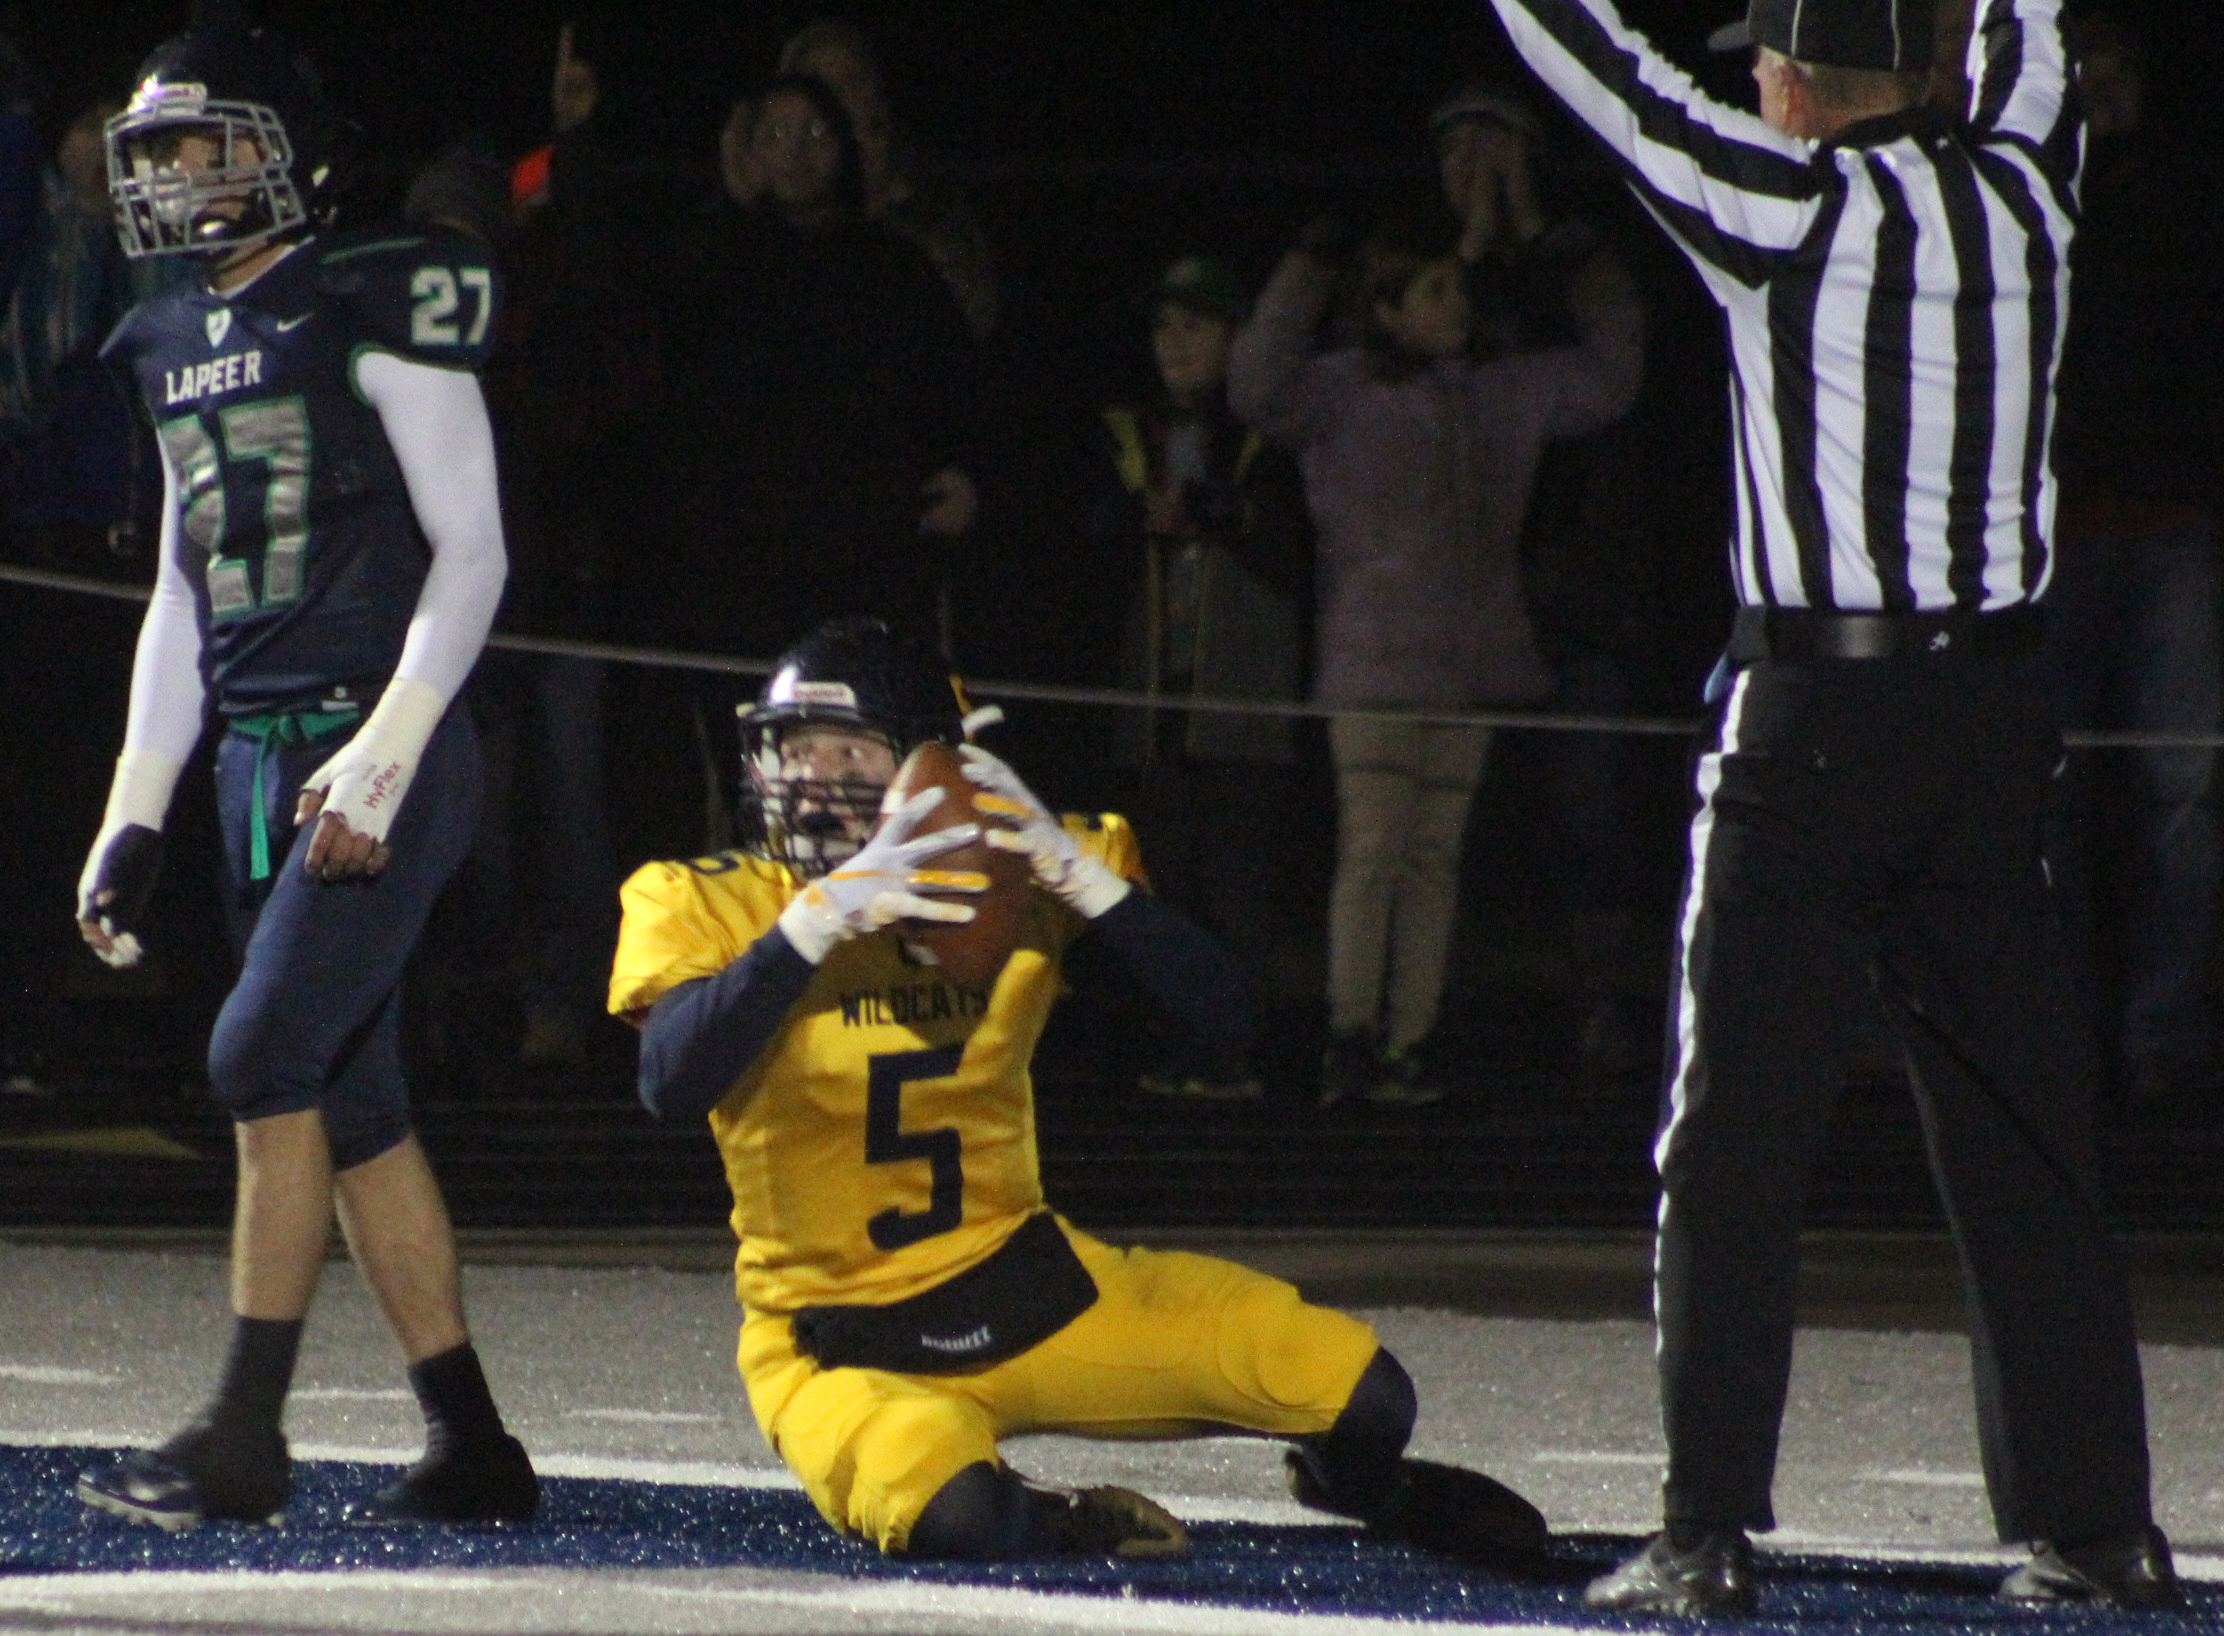 Joseph Miller scored Oxford’s only touchdown of the game. Photos by Joe Oster.